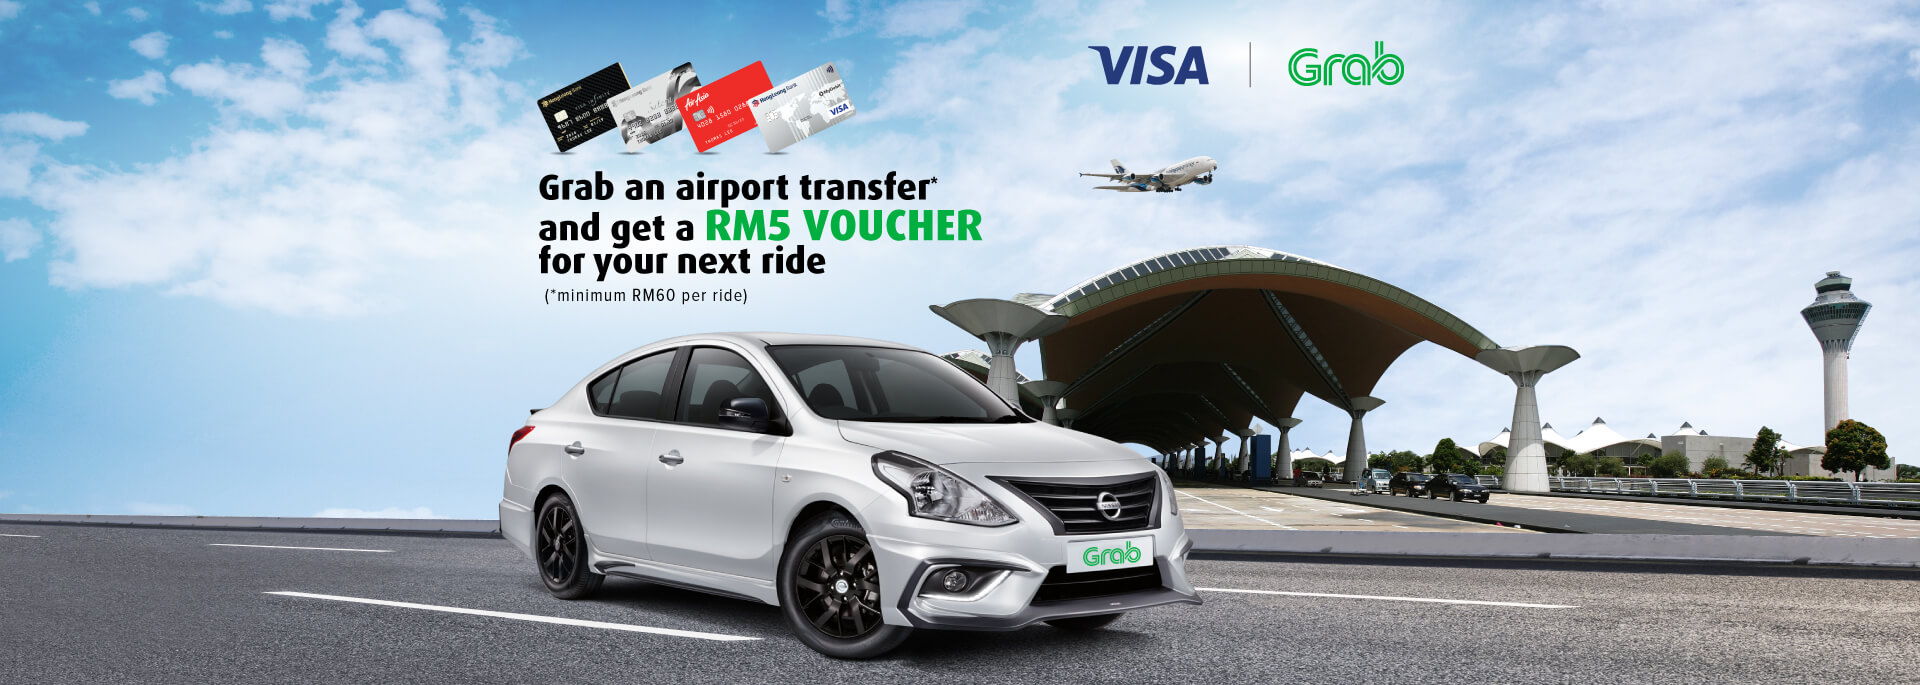 Promotions | Grab your airport transfer now with your Hong ...